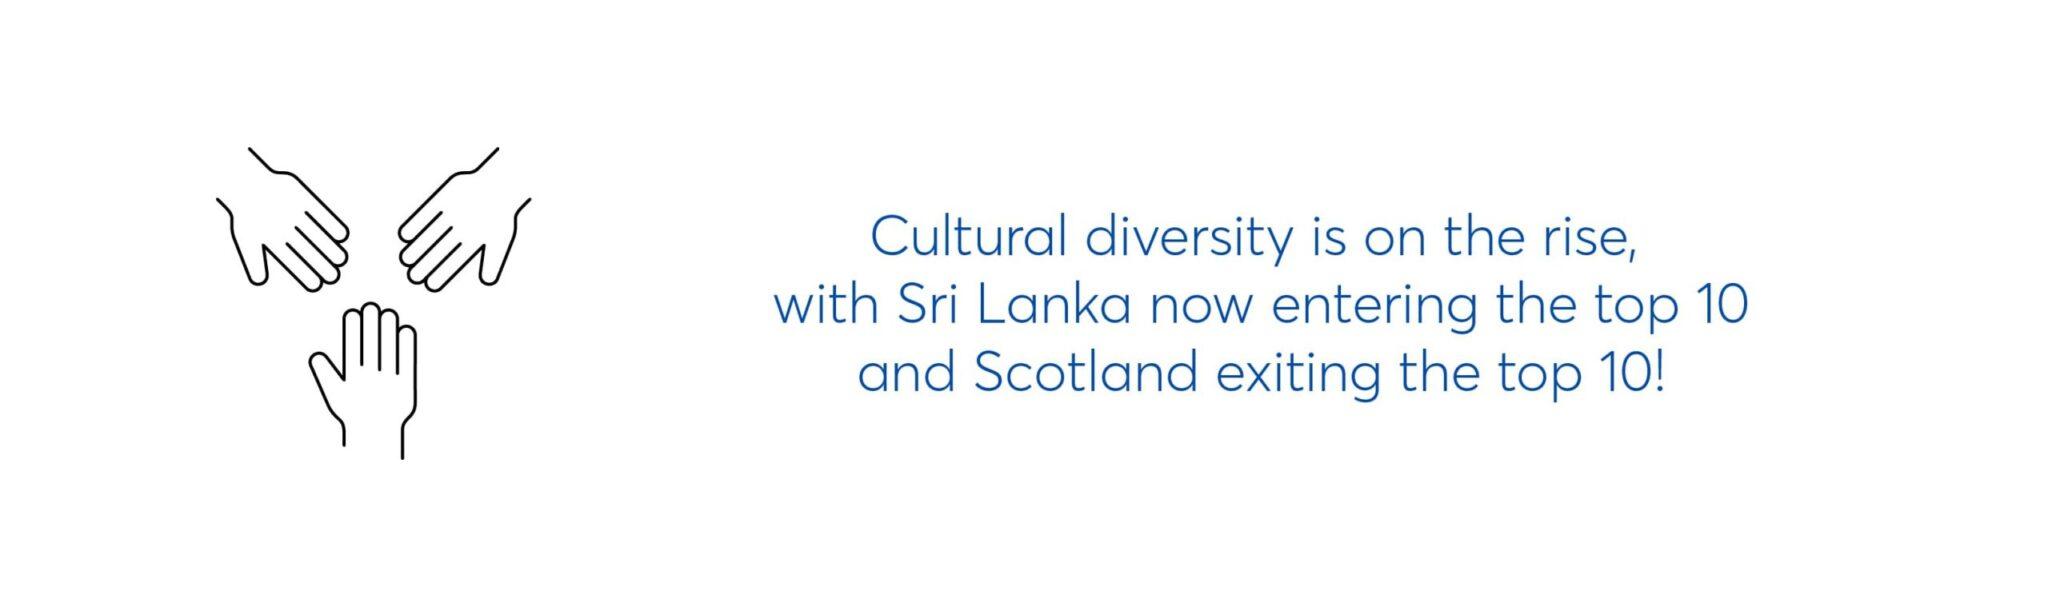 text graphic which reads cultural diversity is on the rise, with sri lanka now entering the top 10 and scotland exiting the top 10!